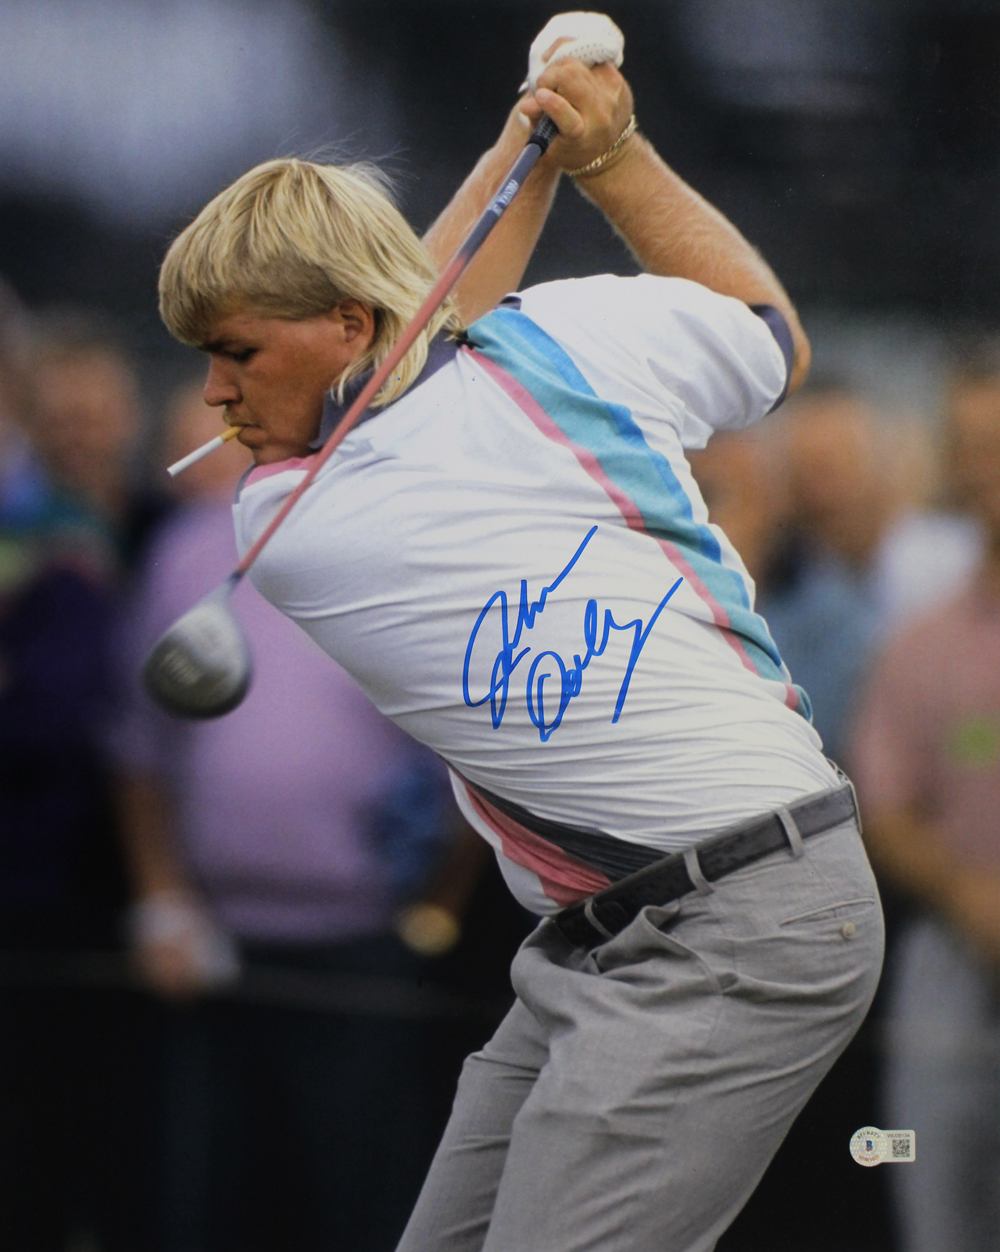 John Daly Autographed/Signed 16x20 Photo Golf Beckett